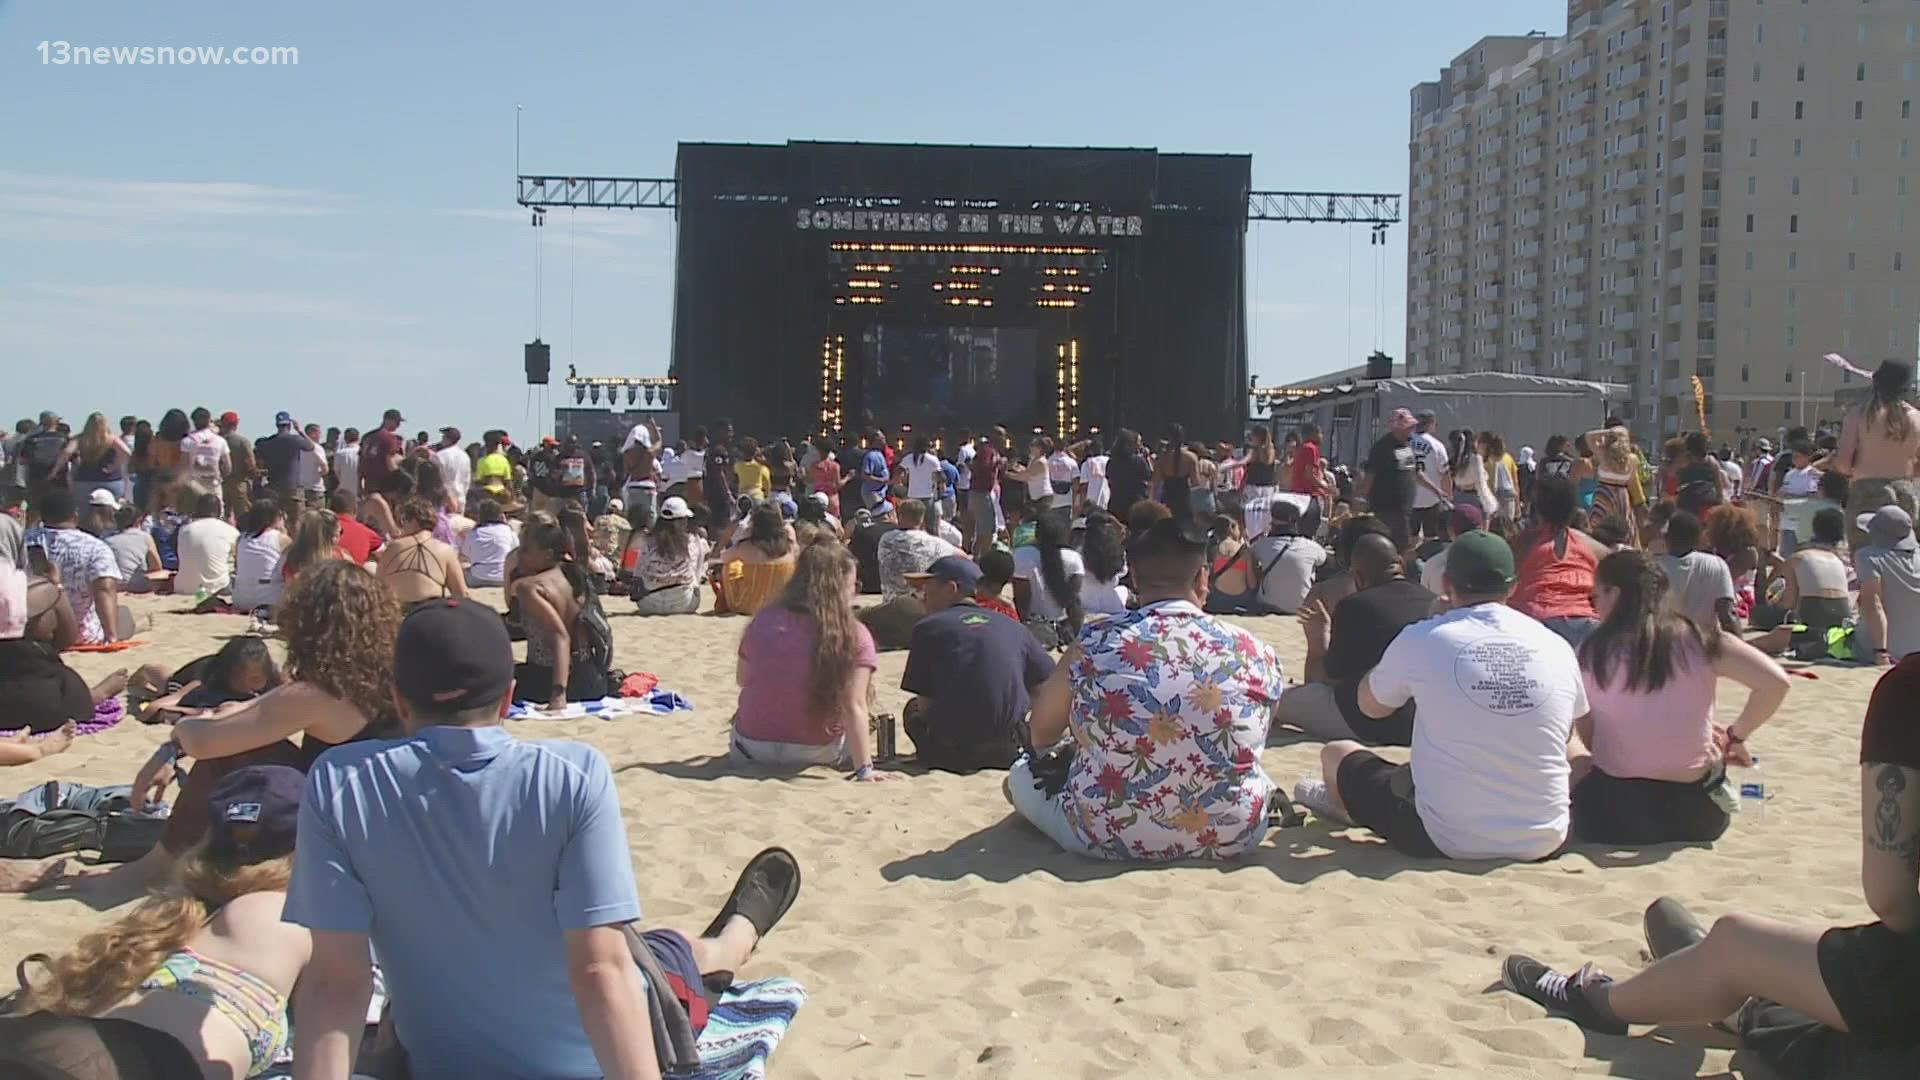 Our Anne Sparaco spoke with Virginia Beach city leaders after a letter from Pharrell Williams cast doubt on the return of the Something in the Water festival.